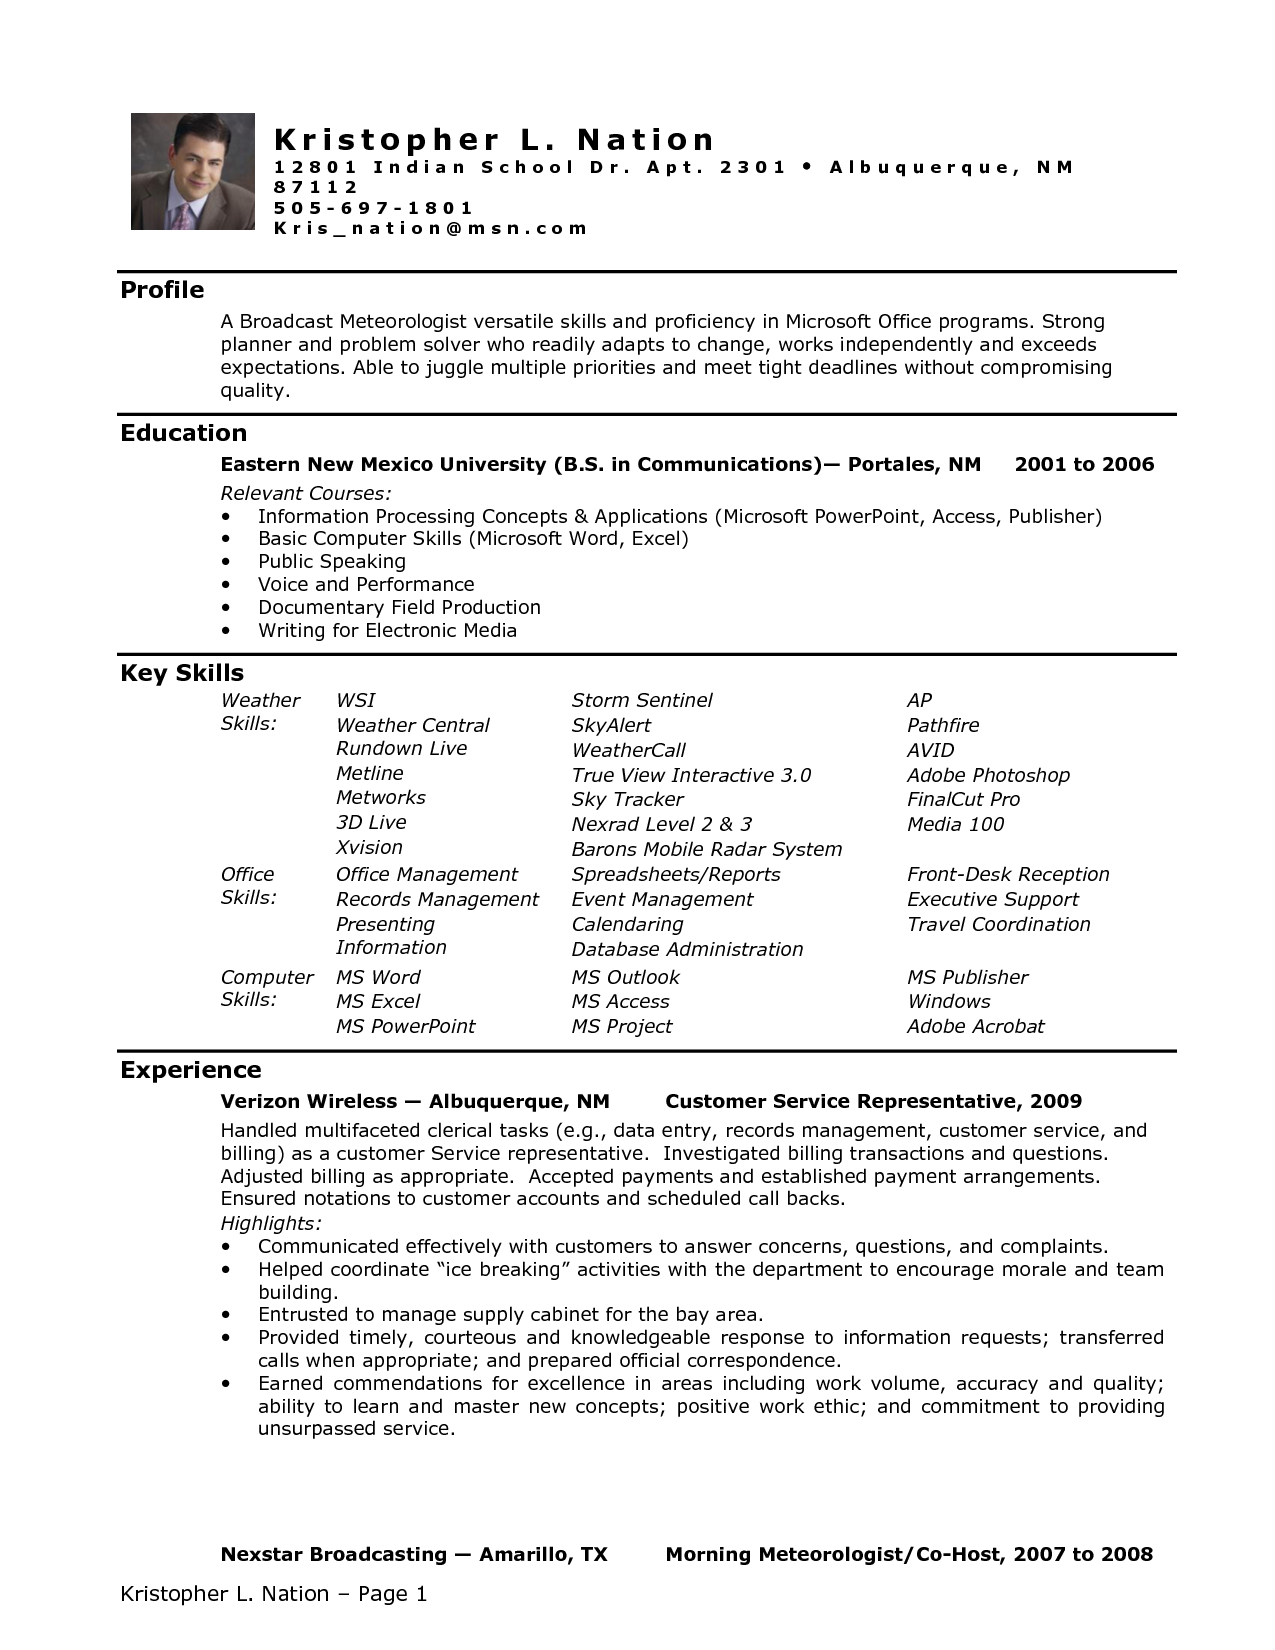 Office Assistant Resume Best Solutions Of Medical Office Admin Resume Samples Amazing For Administration Example office assistant resume|wikiresume.com